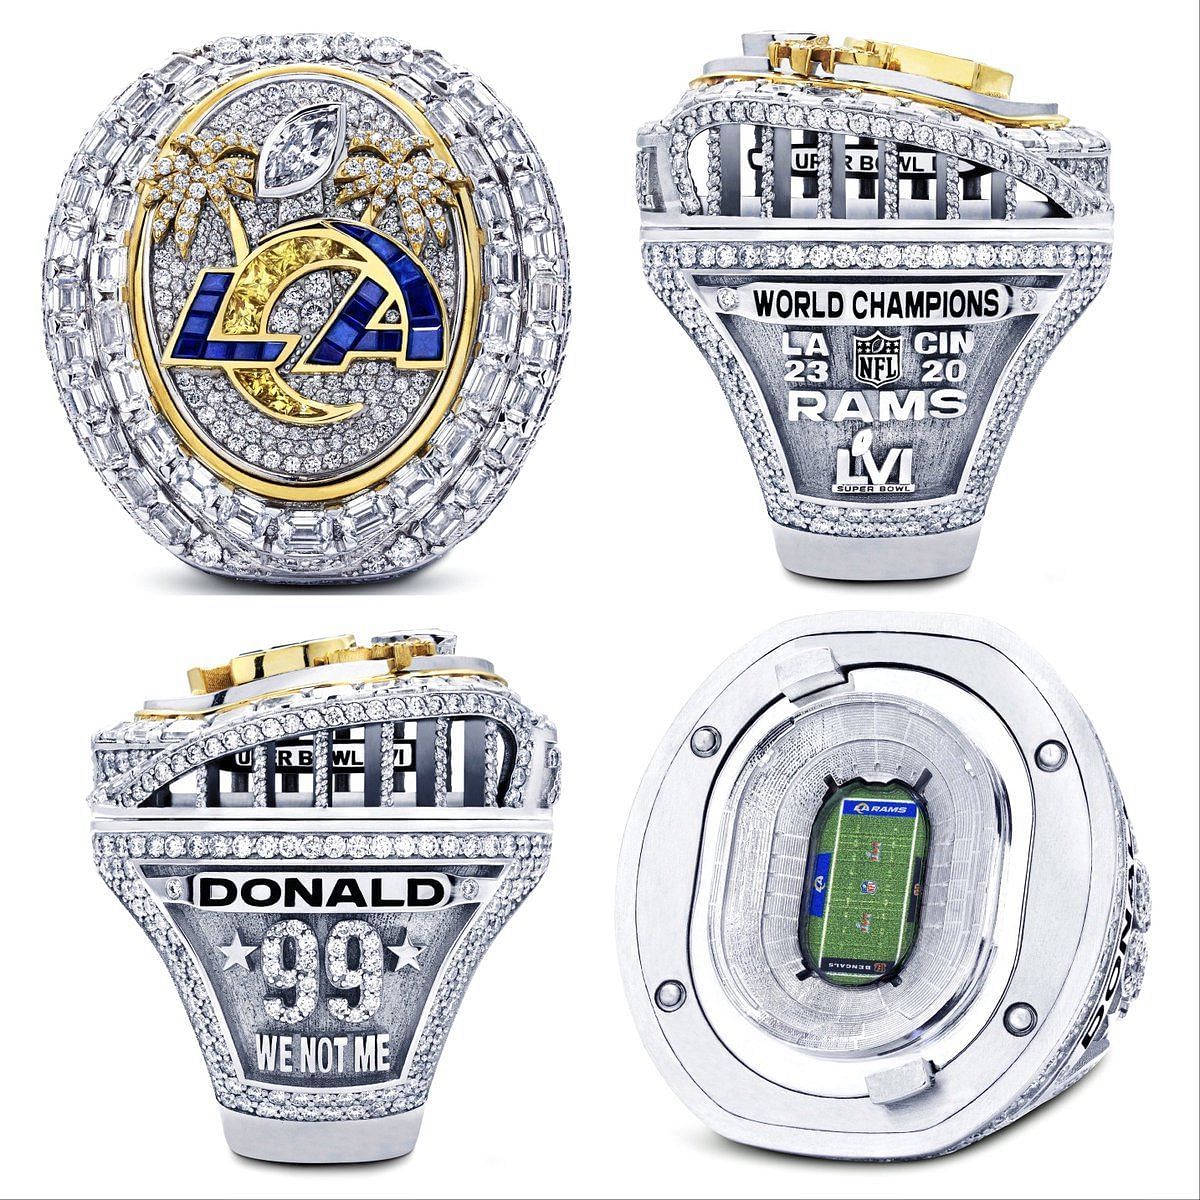 Rams only place one Lombardi Trophy on Super Bowl ring, ignoring win in